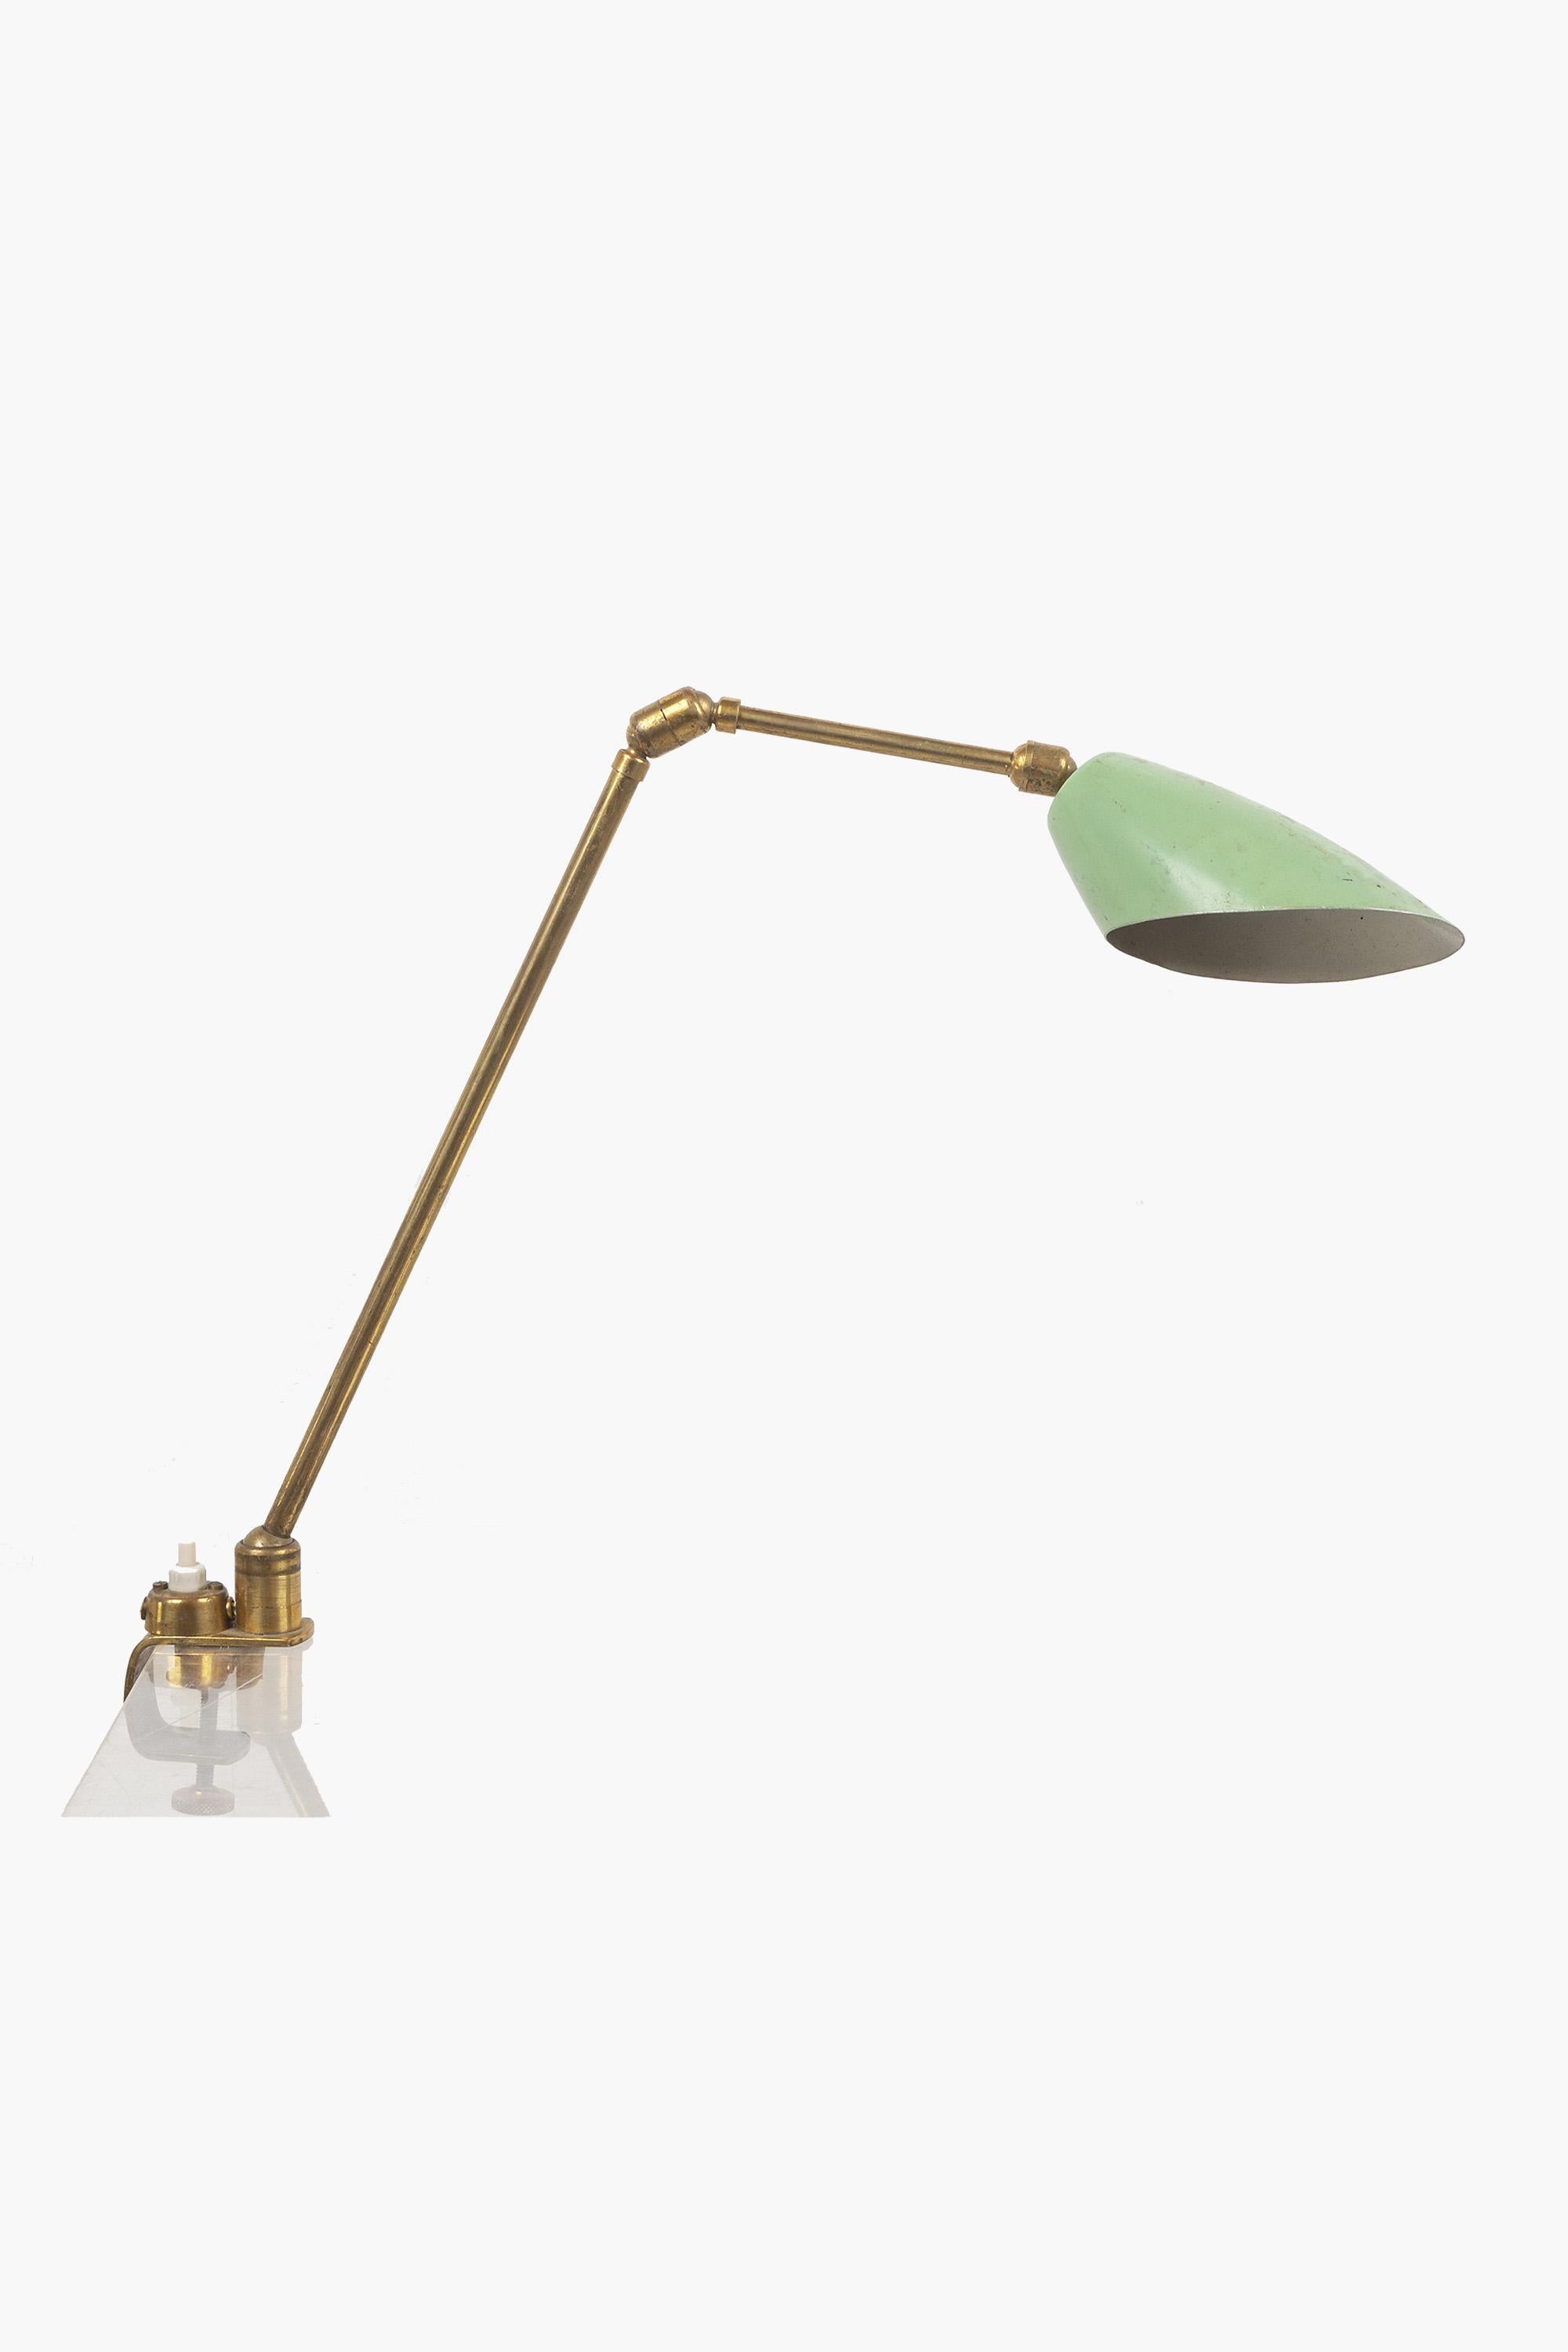 An unusual articulated desk lamp with clamp fitting that allows the light to be attached to a desk or shelf.

In good original condition, with nicely patinated brass and original duck egg blue painted shade.

Can be wired to specification. The